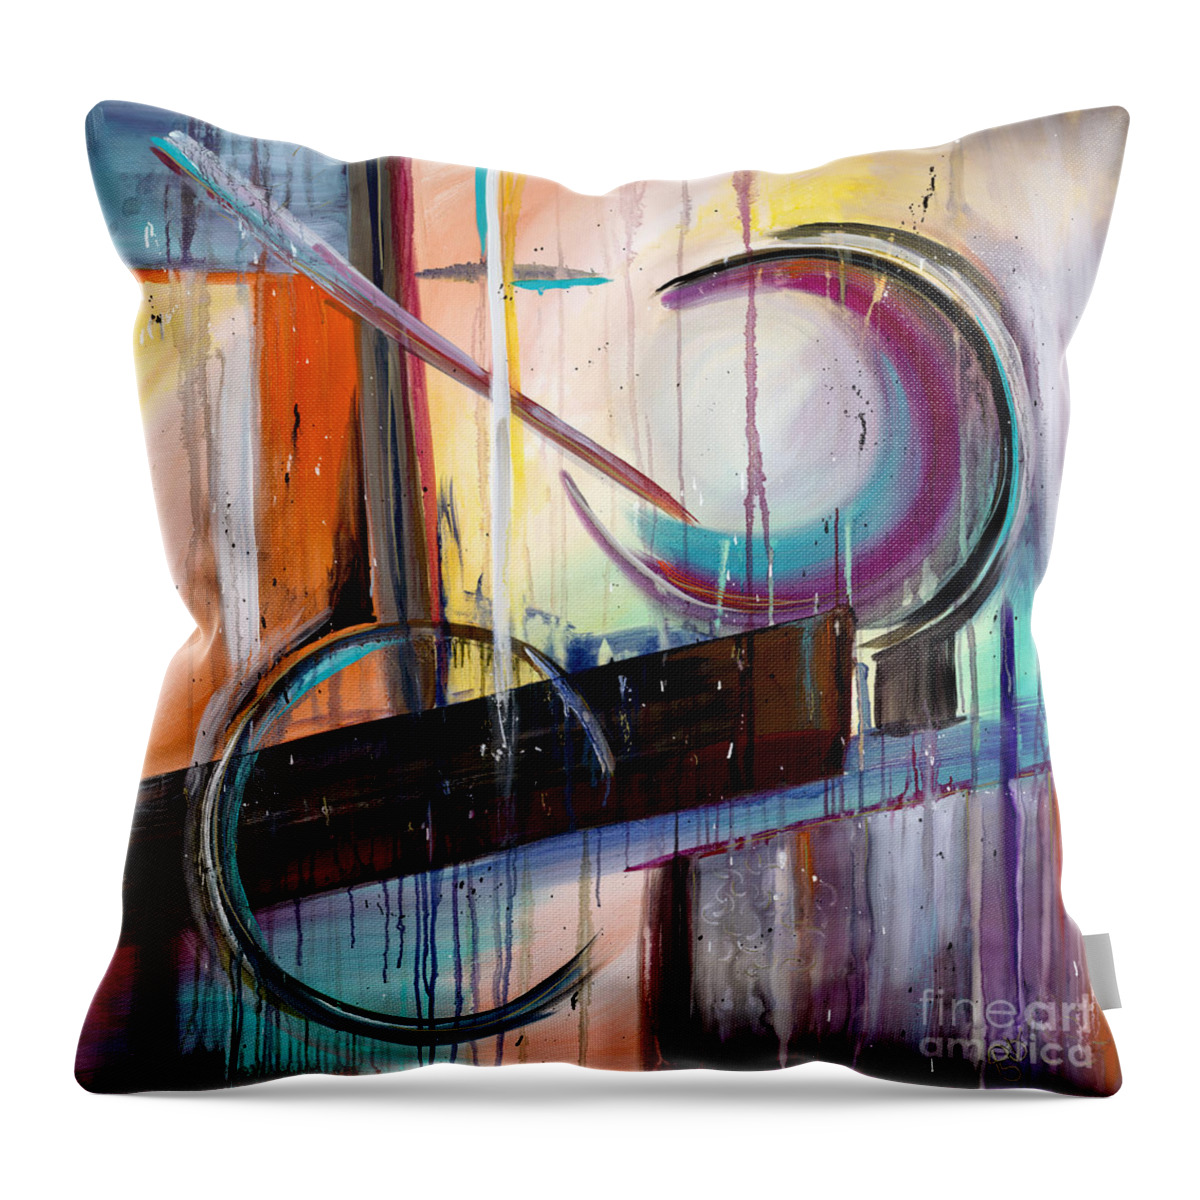 Acrylic Throw Pillow featuring the painting Abstract Fantasy by Patty Vicknair